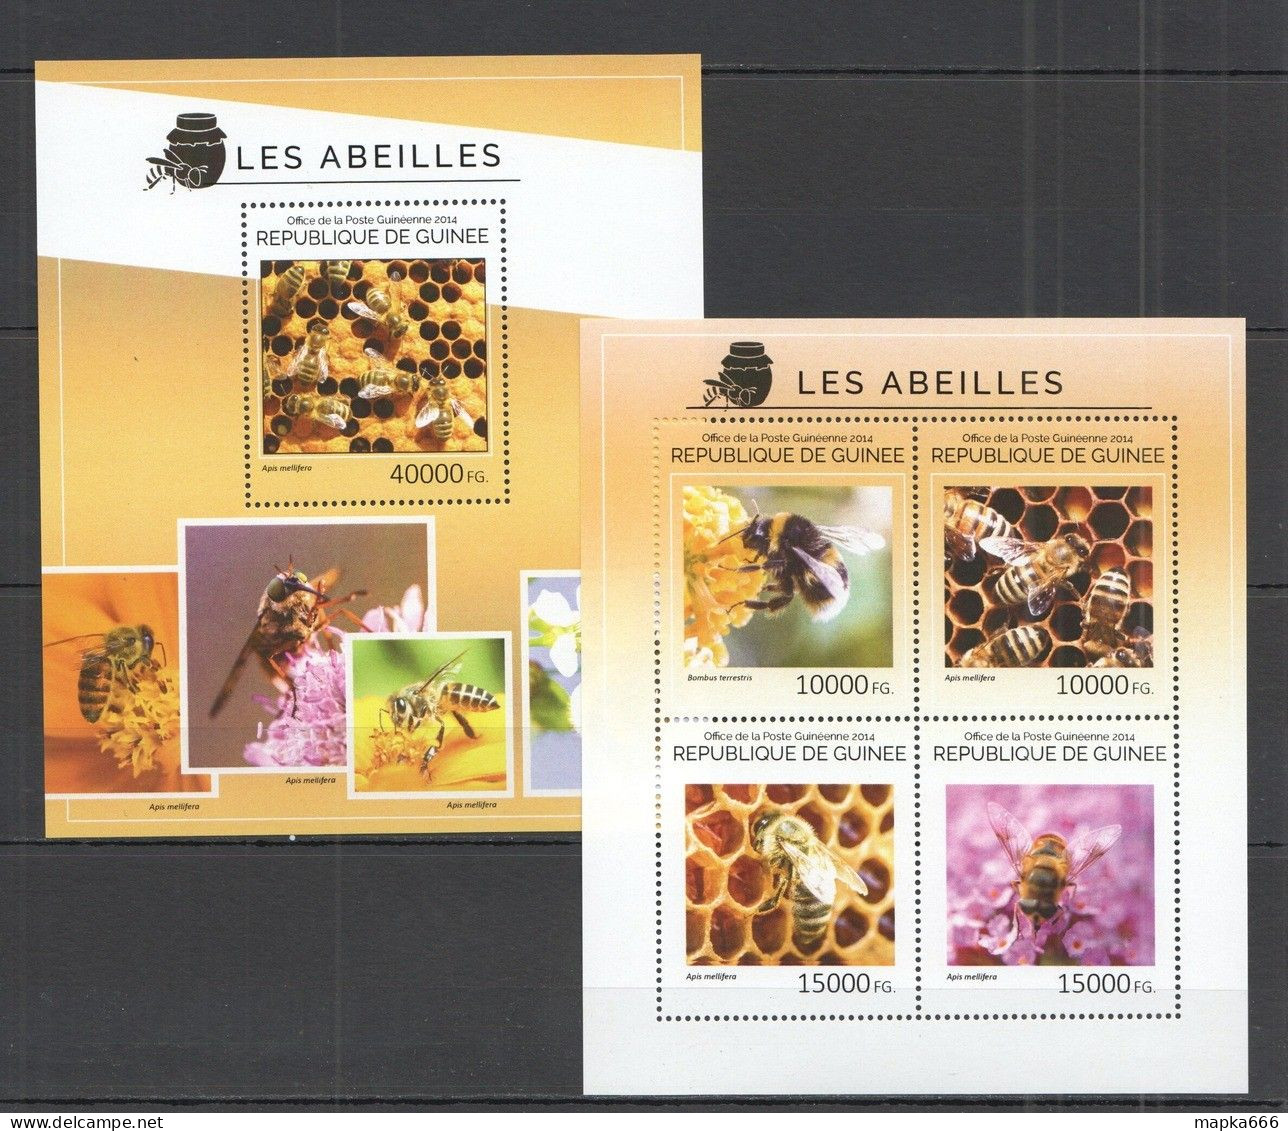 St717 2014 Guinea Fauna Insects Honey Bees Abeilles Kb+Bl Mnh Stamps - Abeilles